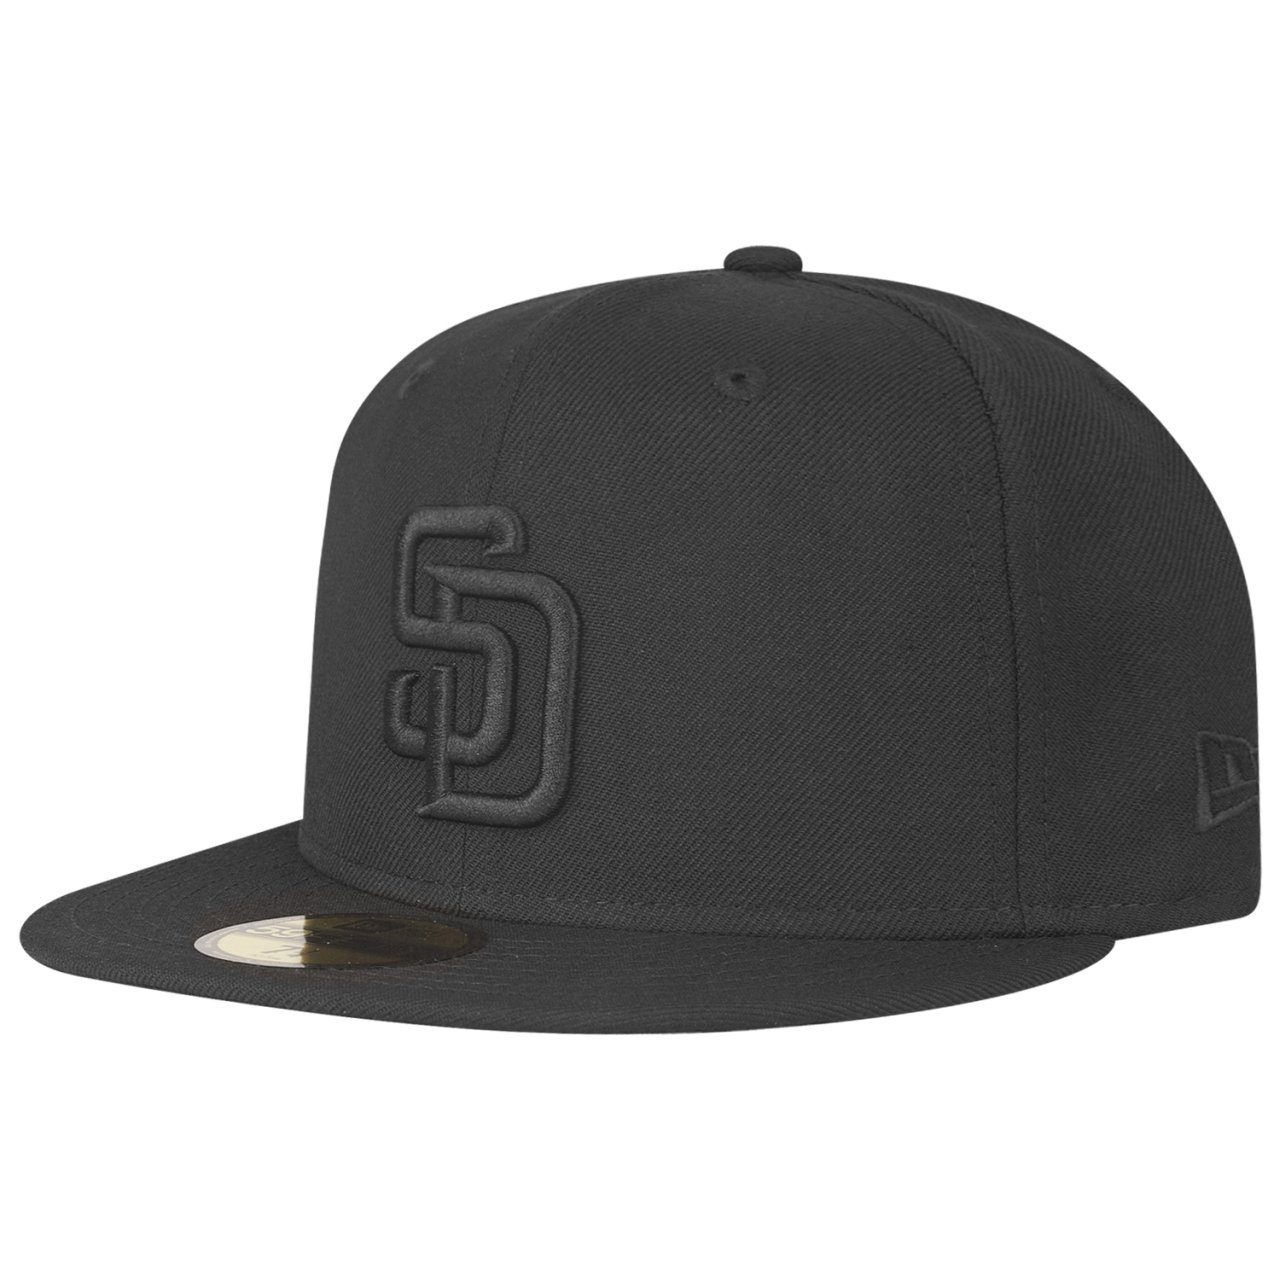 Fitted MLB 59Fifty Cap San New Padres Era Diego